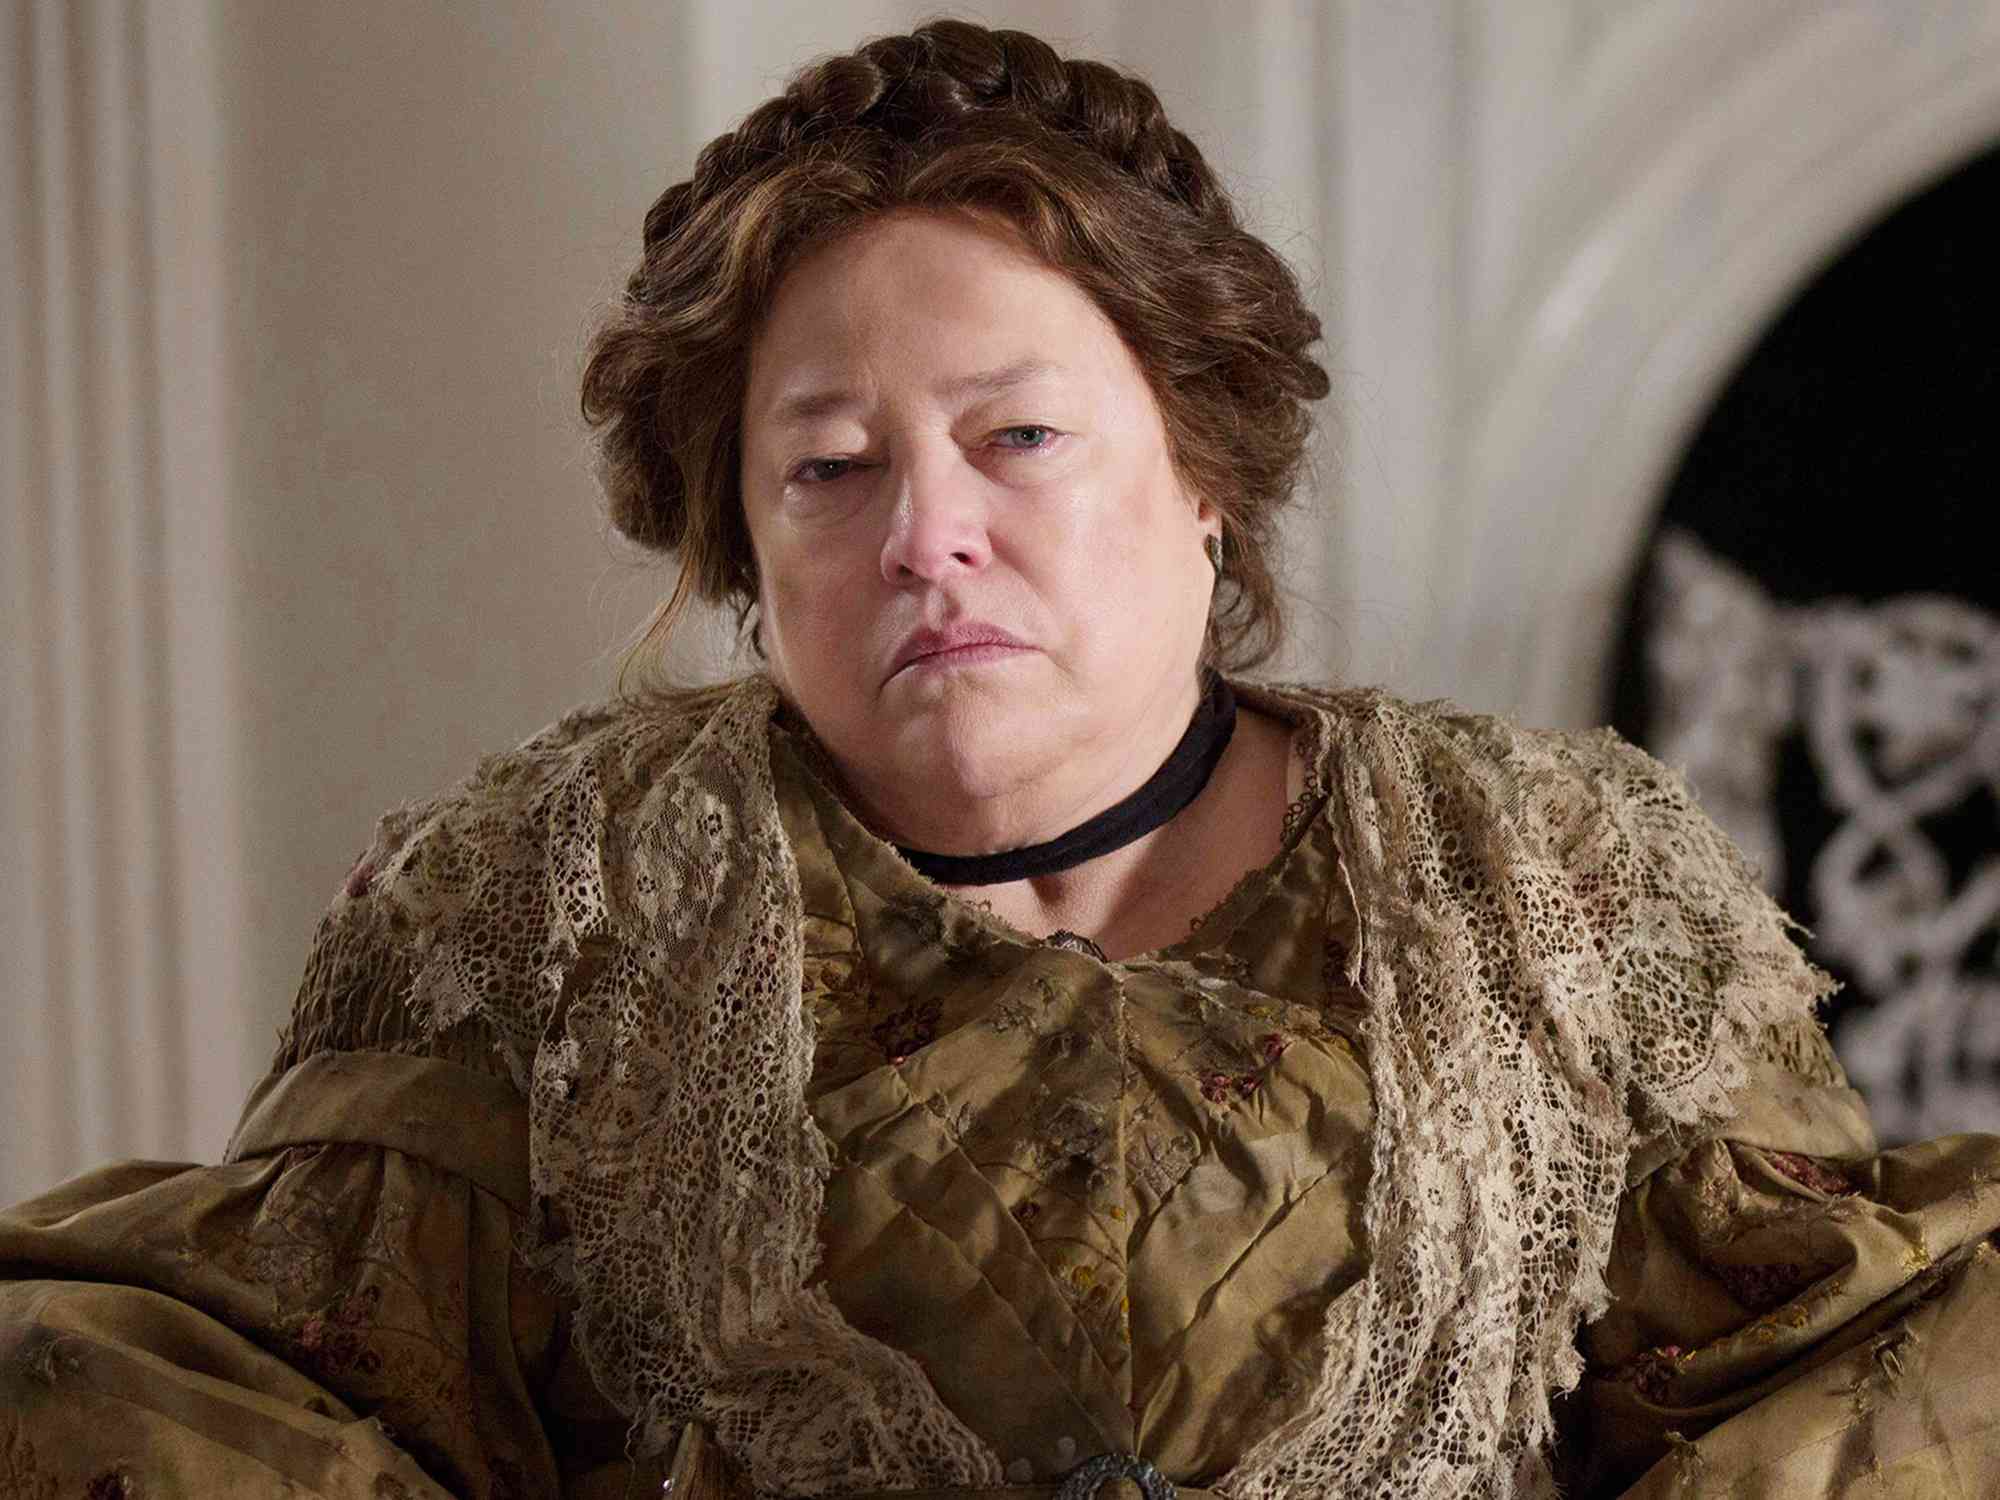 Kathy Bates in 'American Horror Story: Coven' 